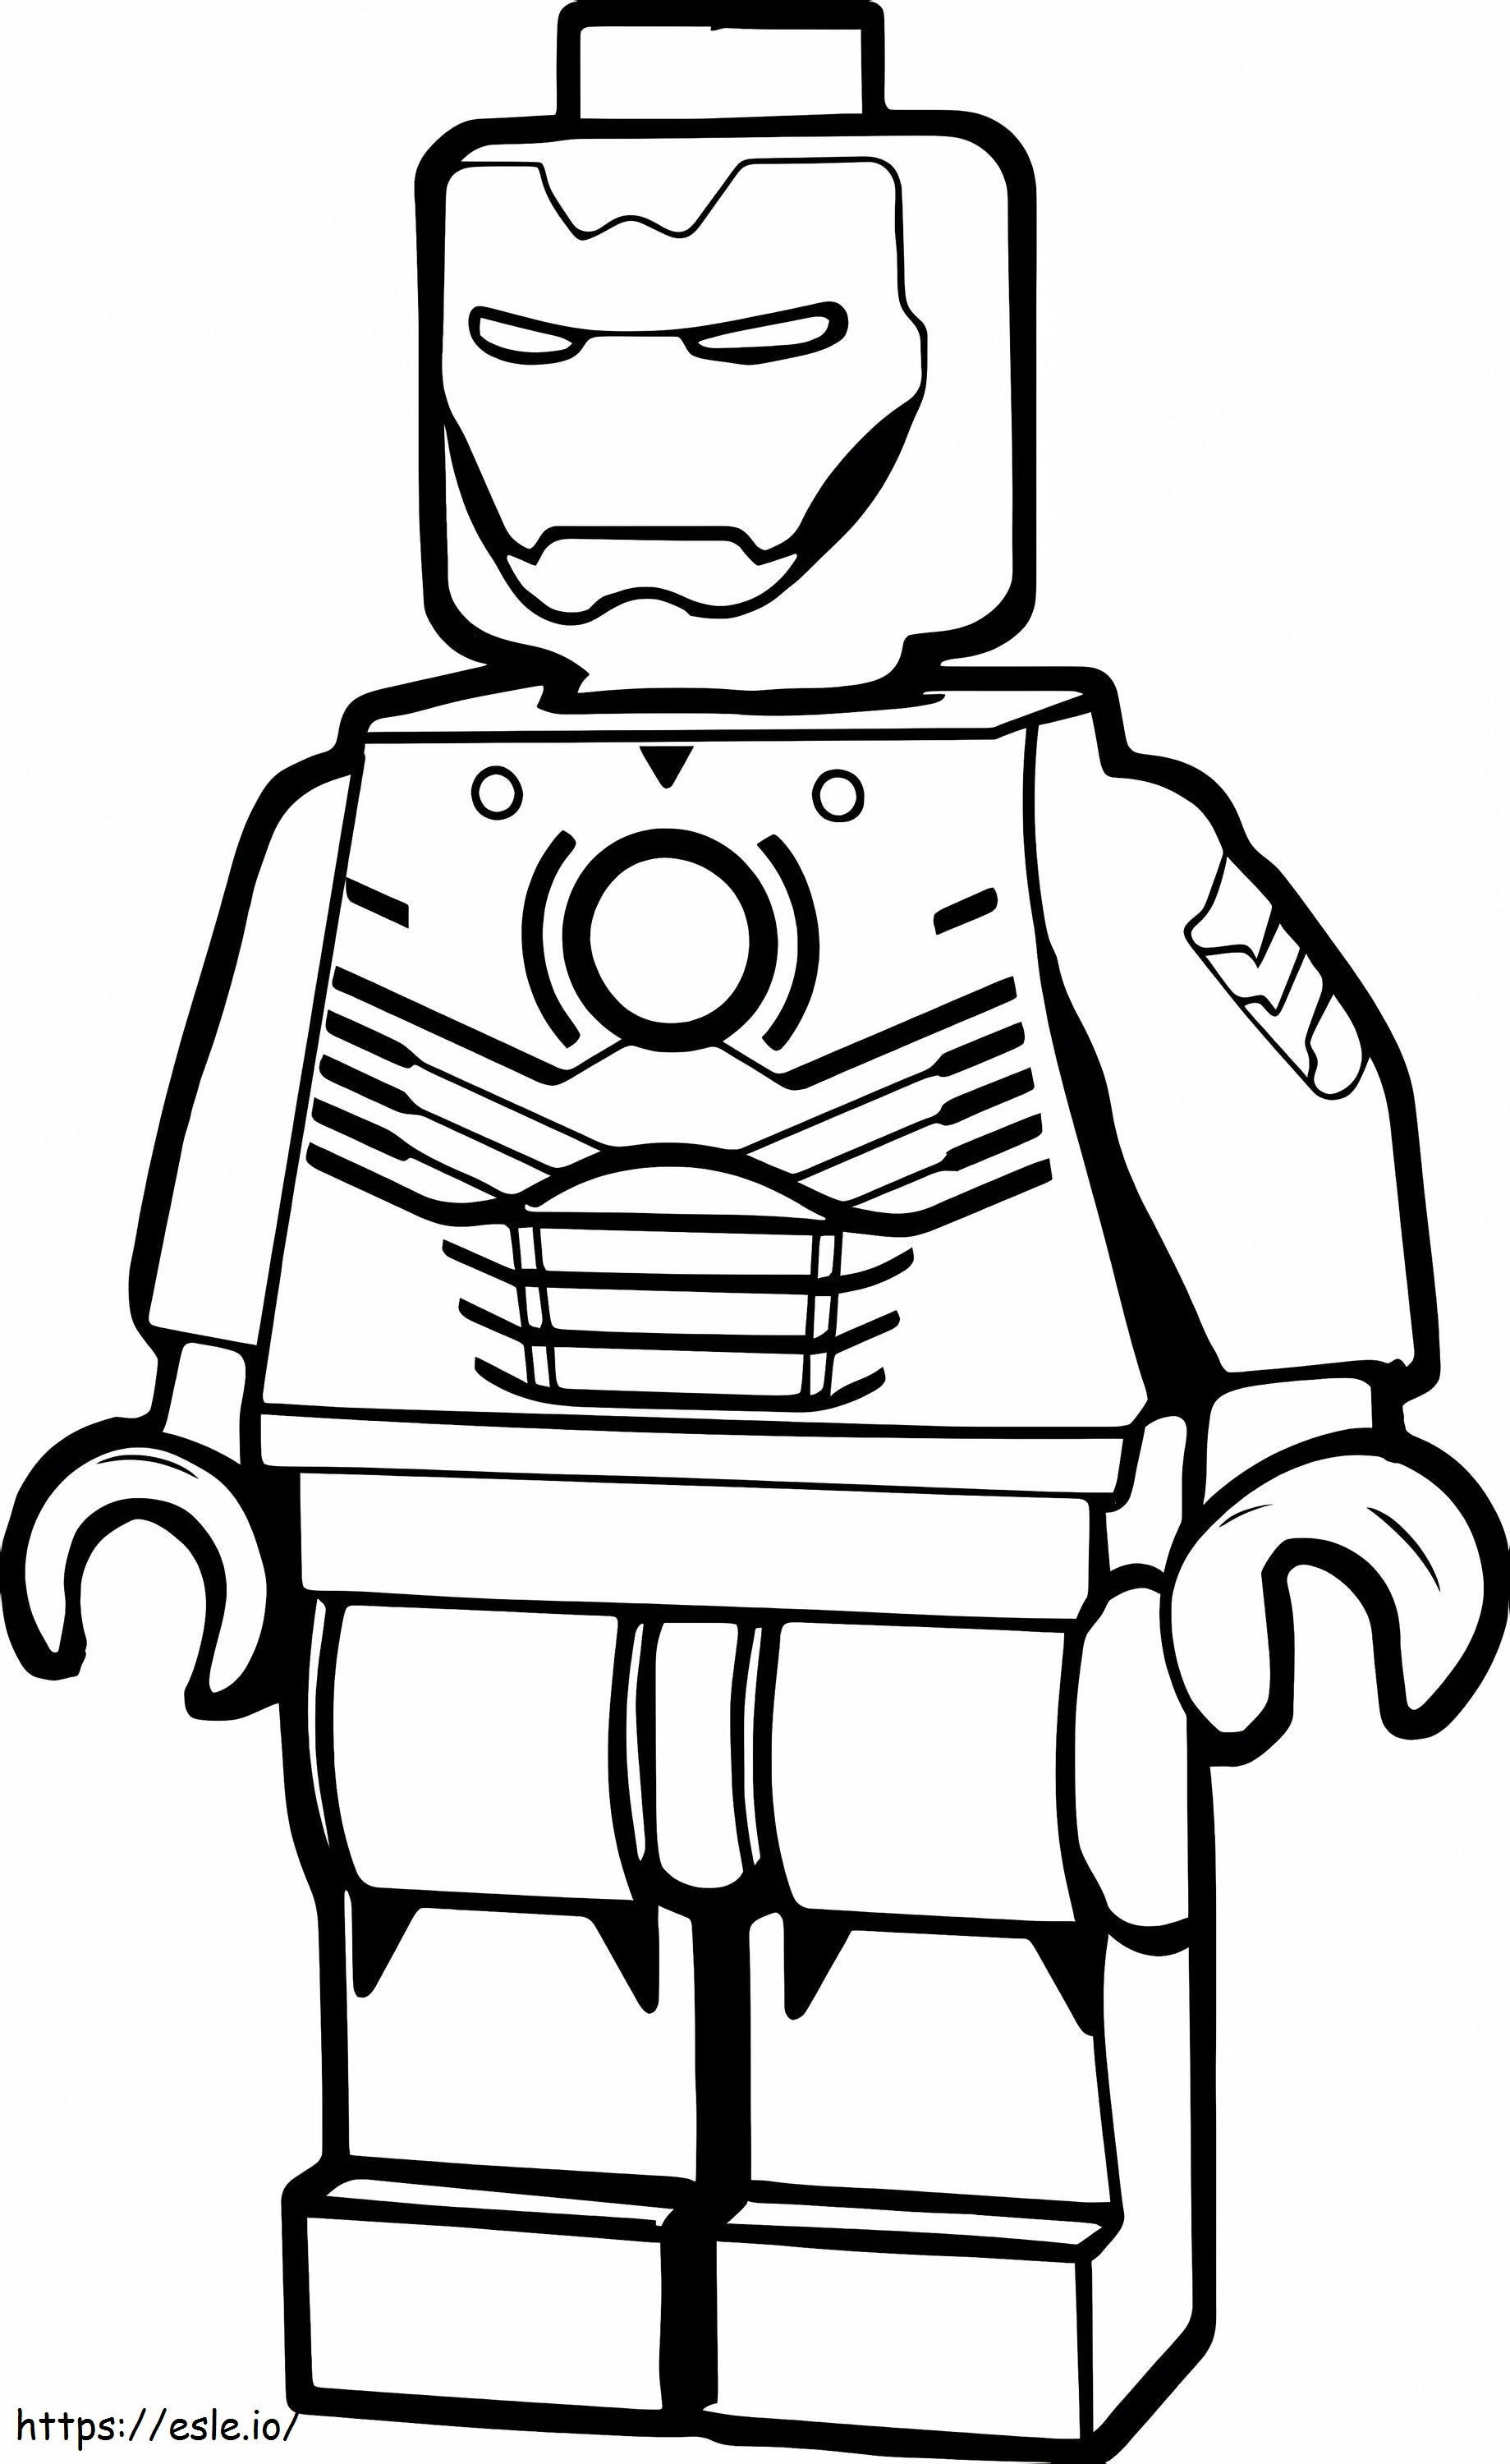 Lego Iron Man coloring page